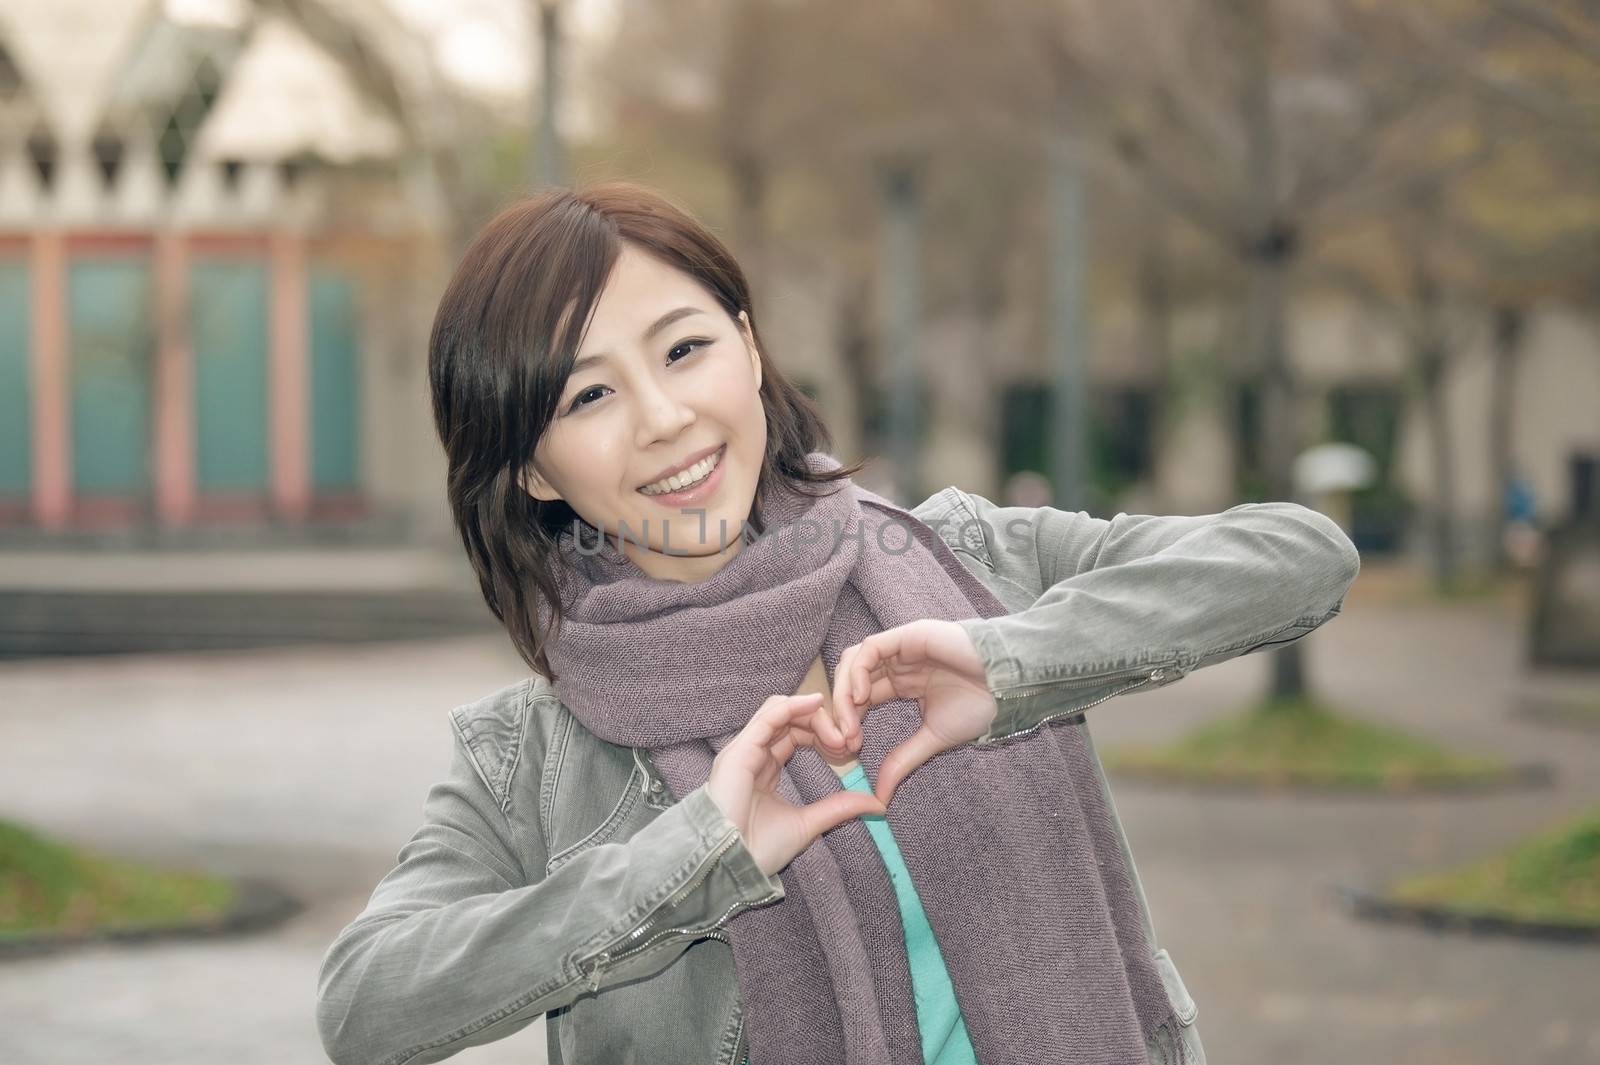 Attractive young woman showing a love shape gesture in the park, Taipei, Taiwan.